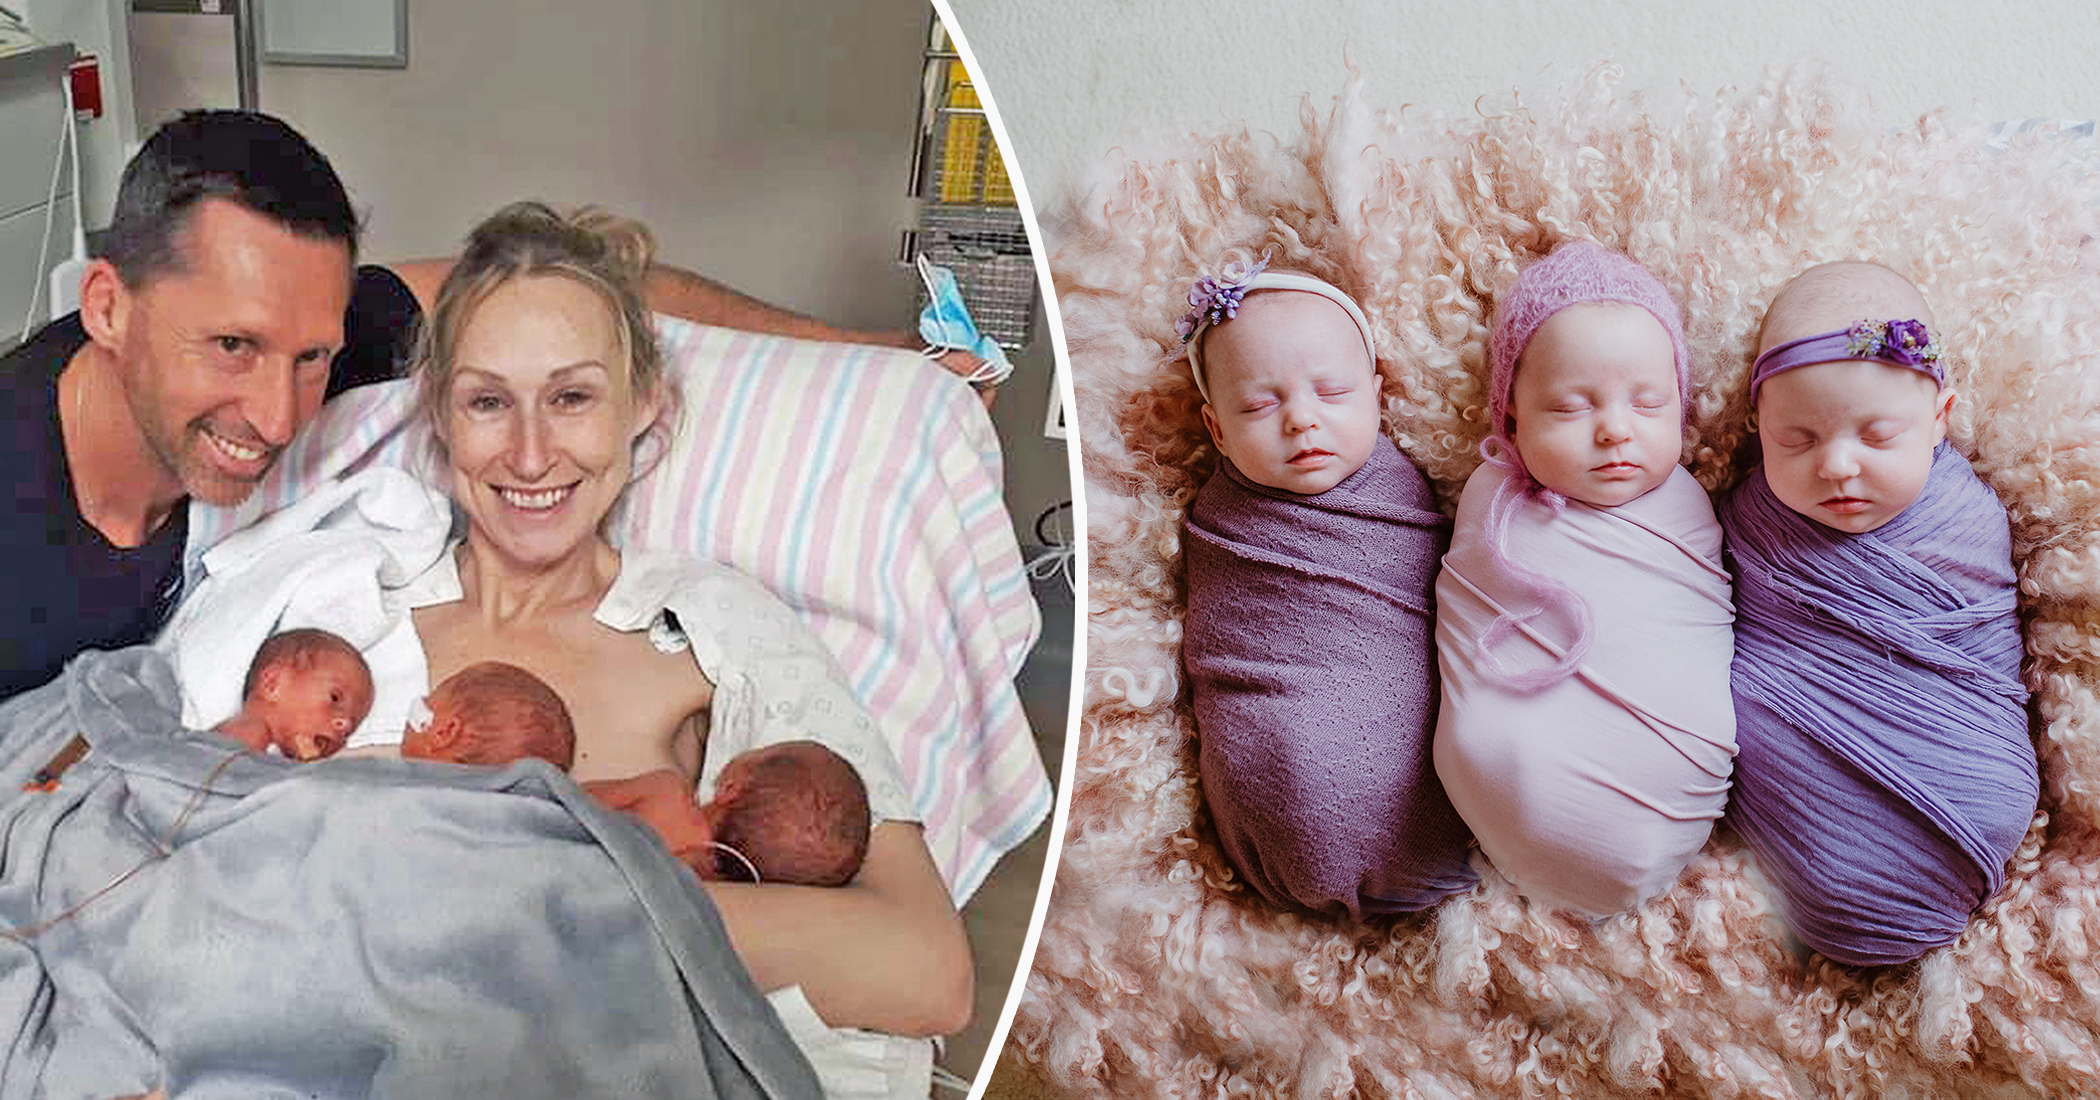 First Time Mom Gives Birth To Triplets At 44 After Six Years Of Trying Four Miscarriages